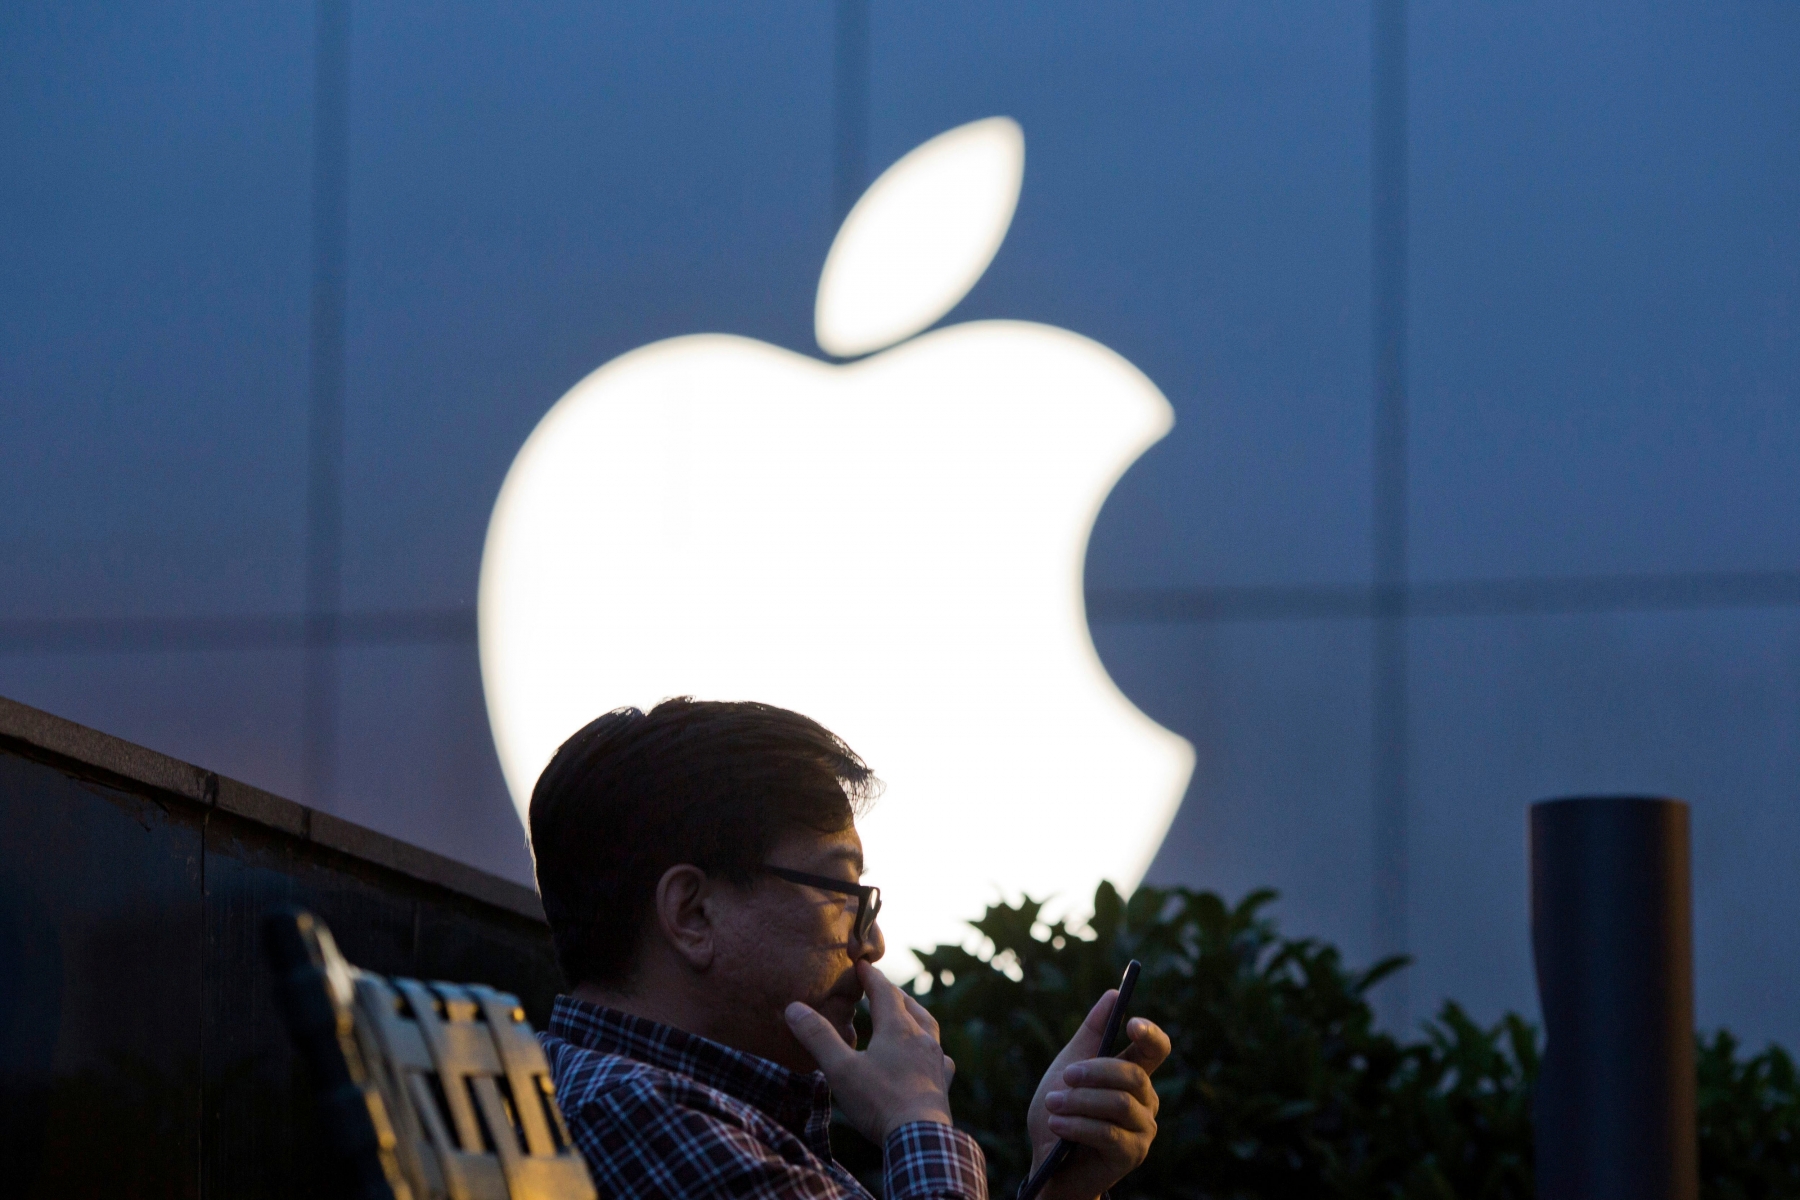 FILE - In this May 13, 2016 file photo, a man uses his mobile phone near an Apple store logo in Beijing, China. Apple Inc. has filed suit in China challenging Qualcomm Inc.Äôs fees for technology used in smartphones two years after Chinese regulators fined the chipmaker for its licensing practices. Two suits filed by the iPhone maker accuse Qualcomm of abusing its control over essential technology to charge excessive licensing fees, a Beijing court said on its microblog. (AP Photo/Ng Han Guan, File) China Apple Qualcomm